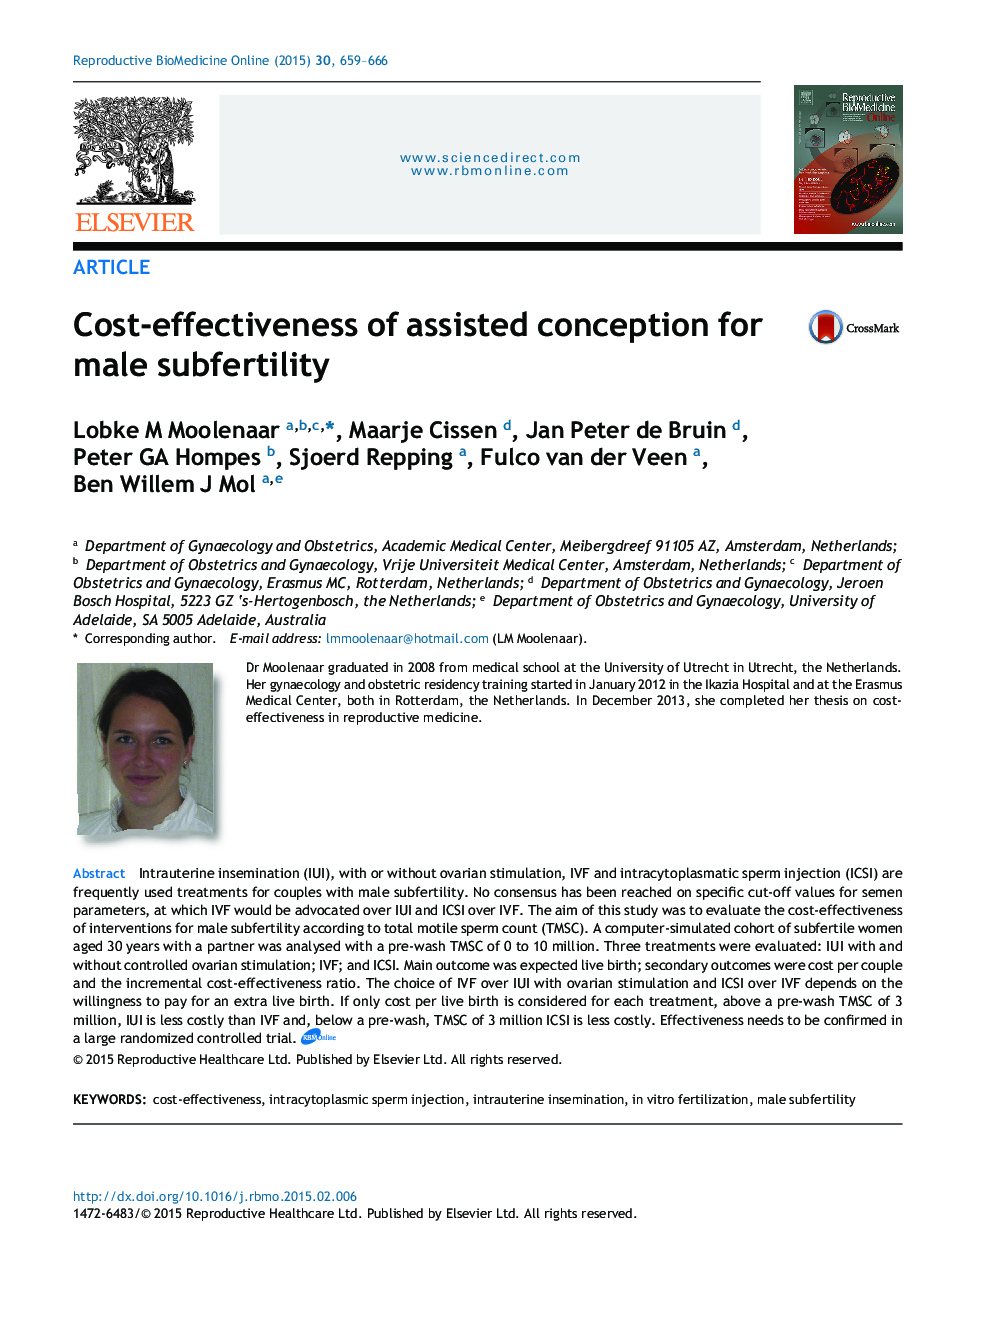 Cost-effectiveness of assisted conception for male subfertility